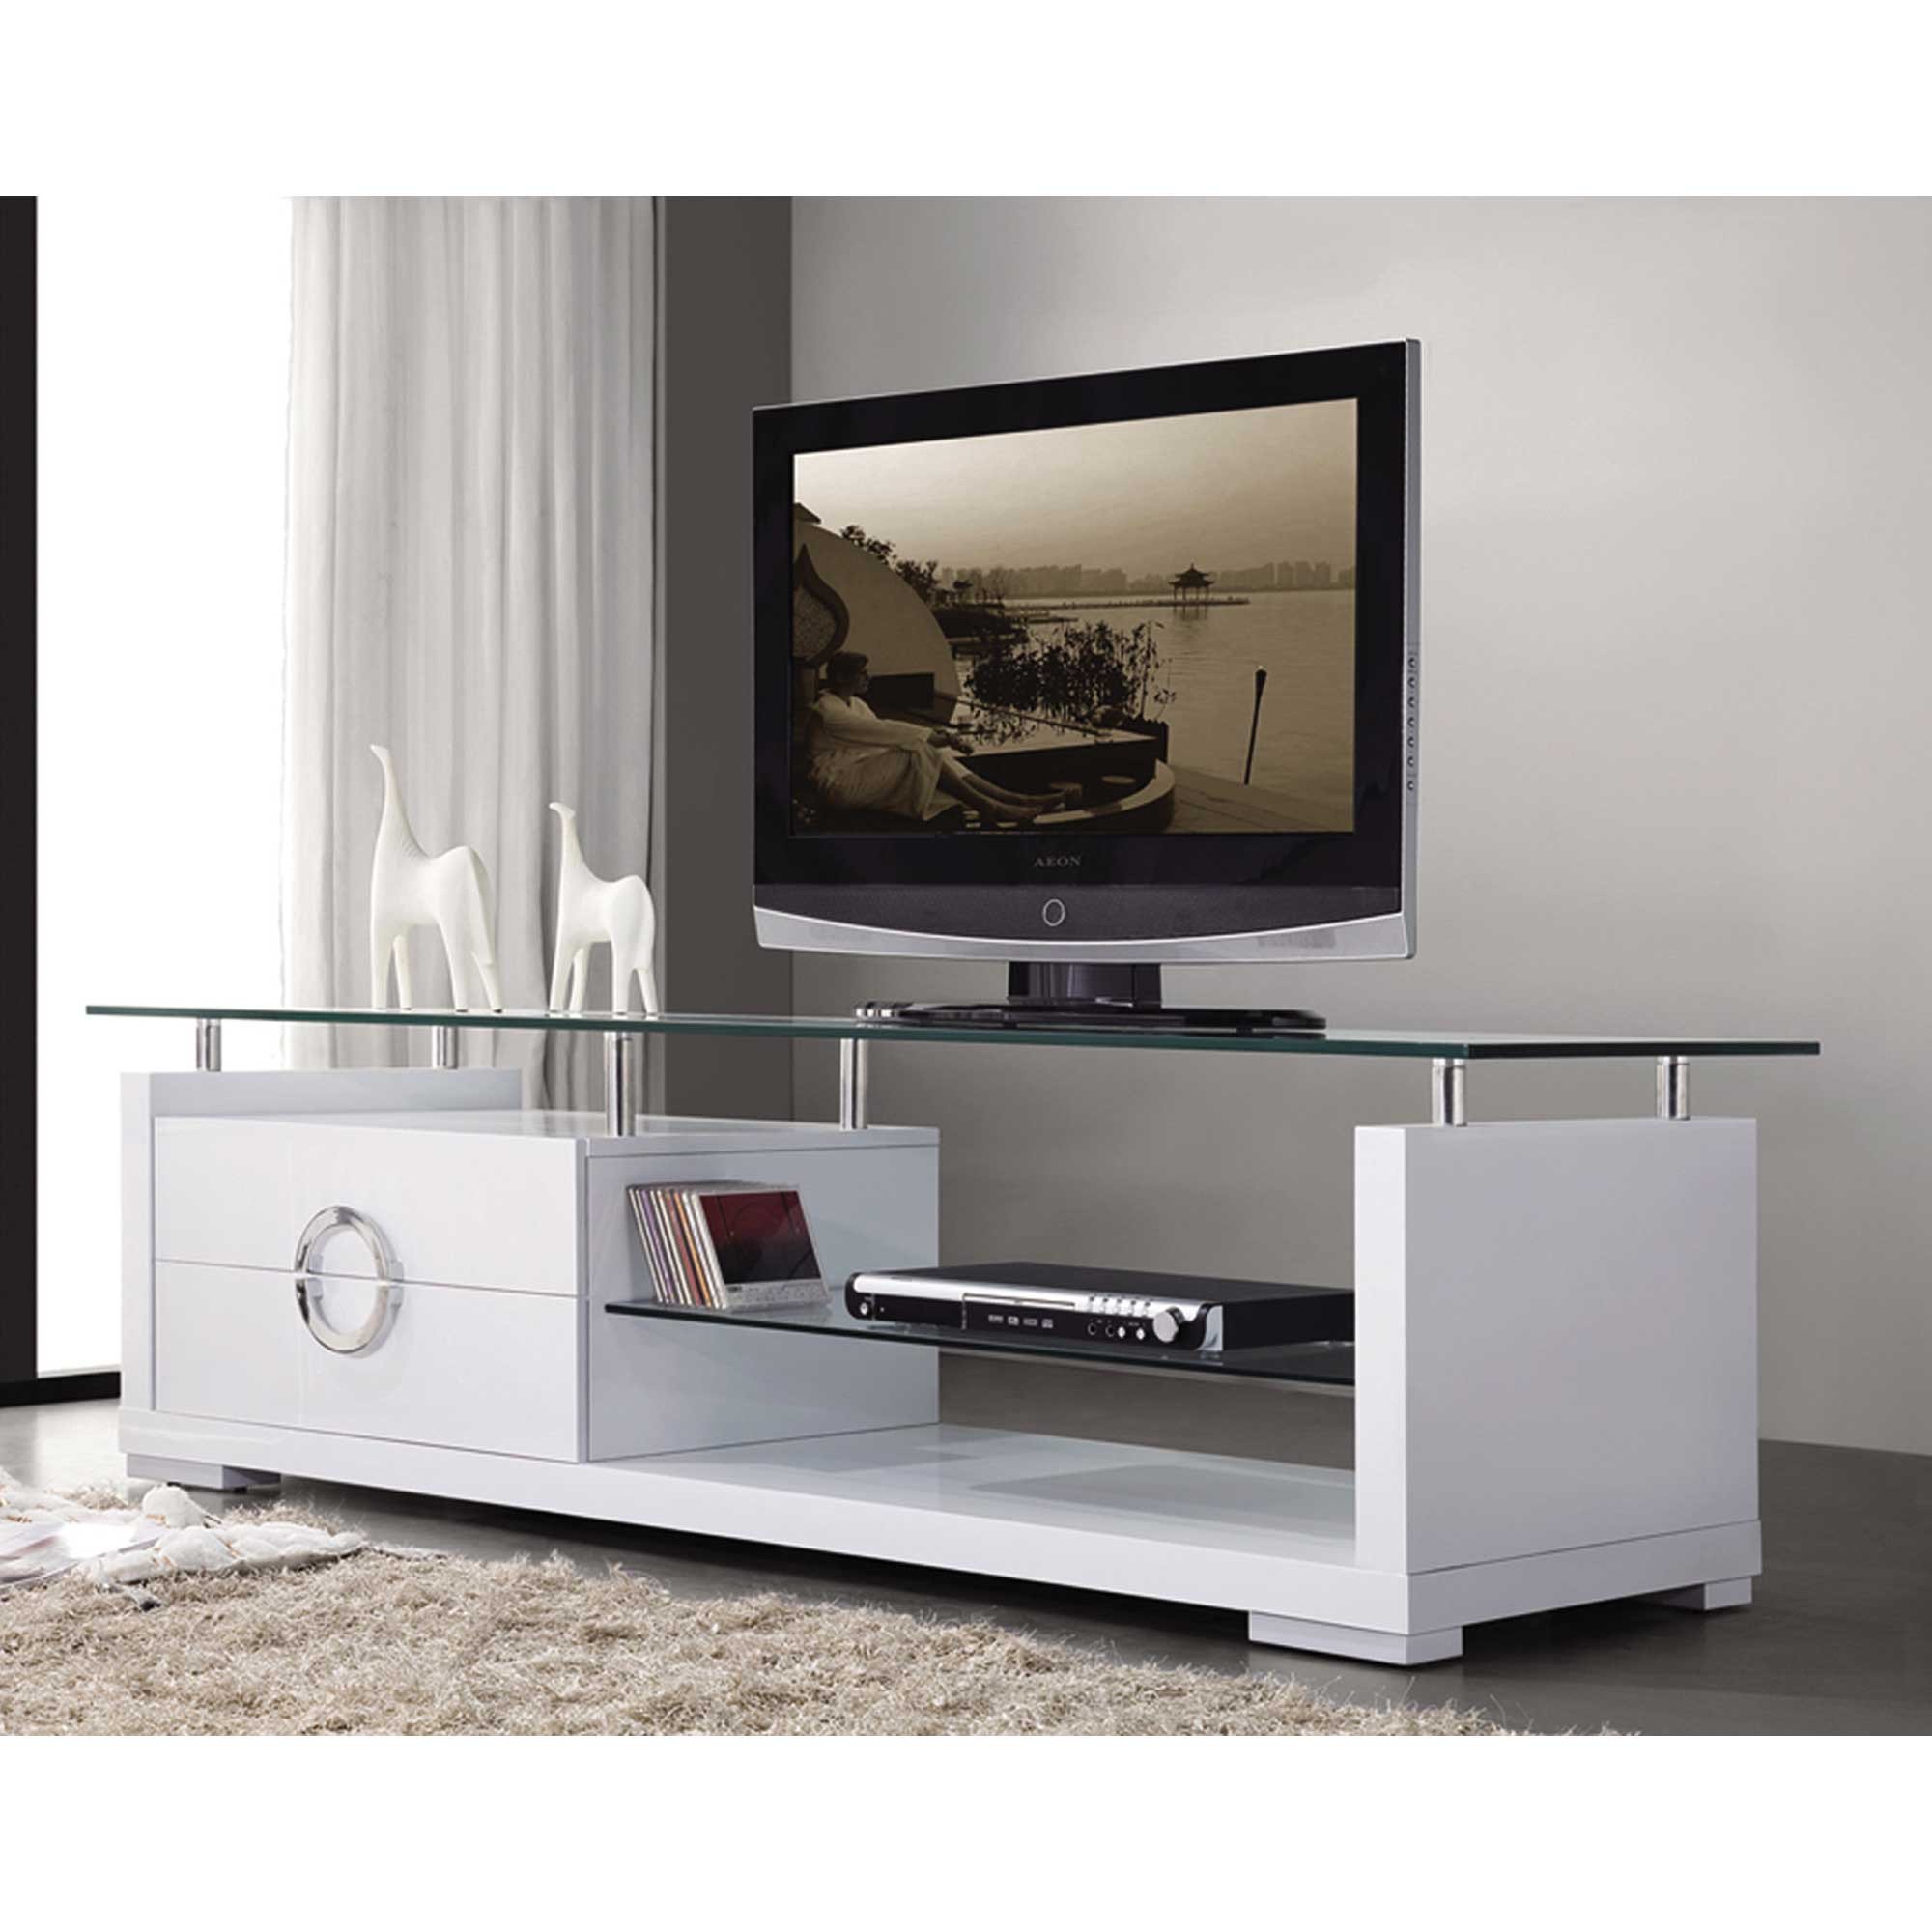 Table for Tv In Bedroom Elegant Modern White Tv Stand – Home Deco Frame and Furniture